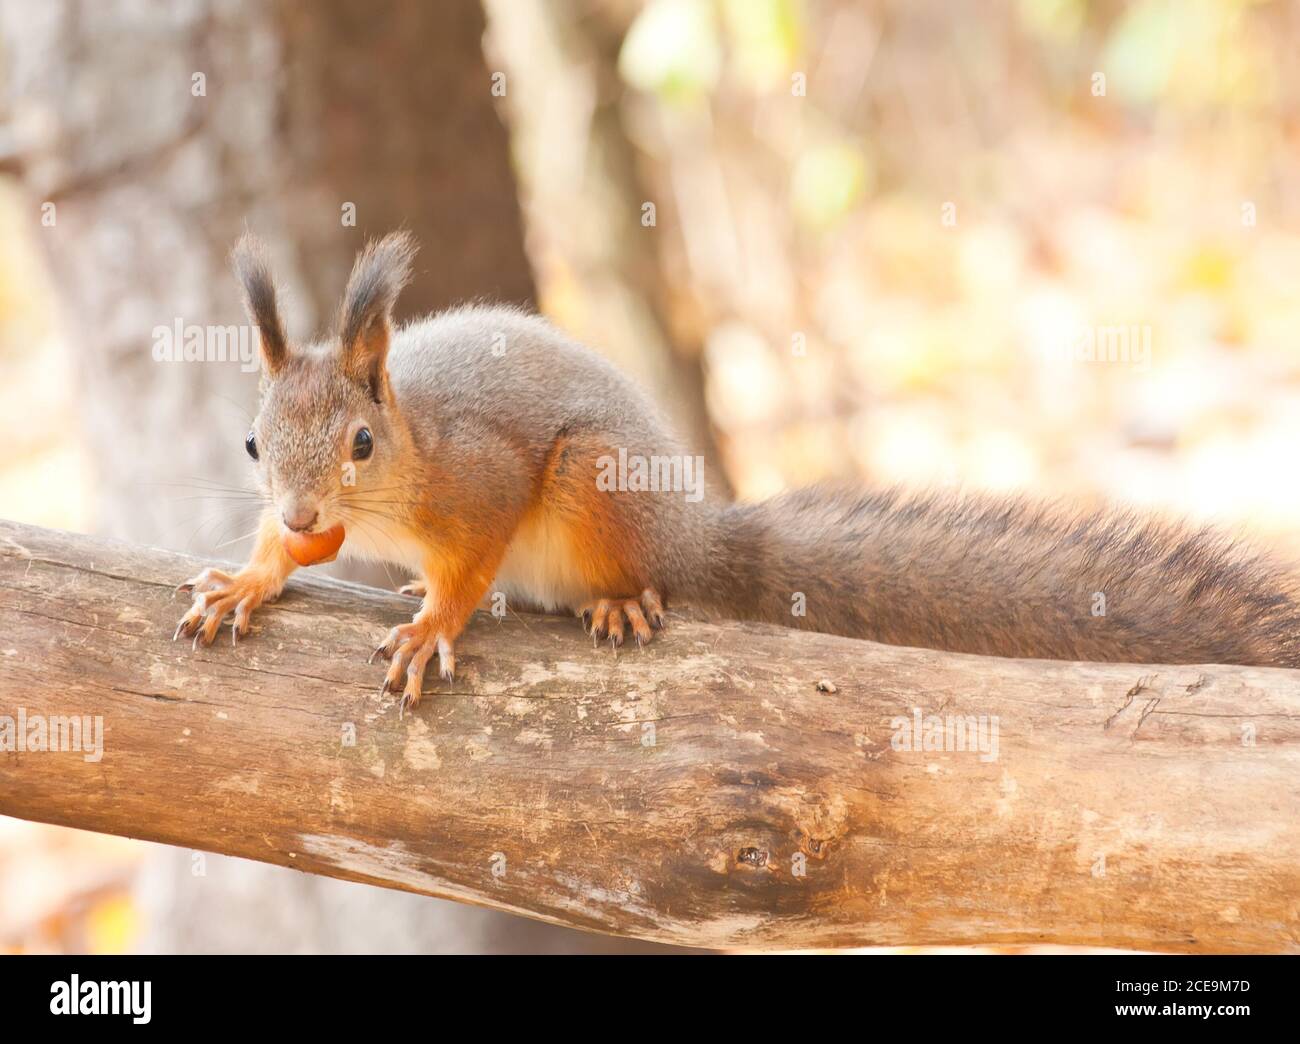 Red squirrel eating a nut Stock Photo